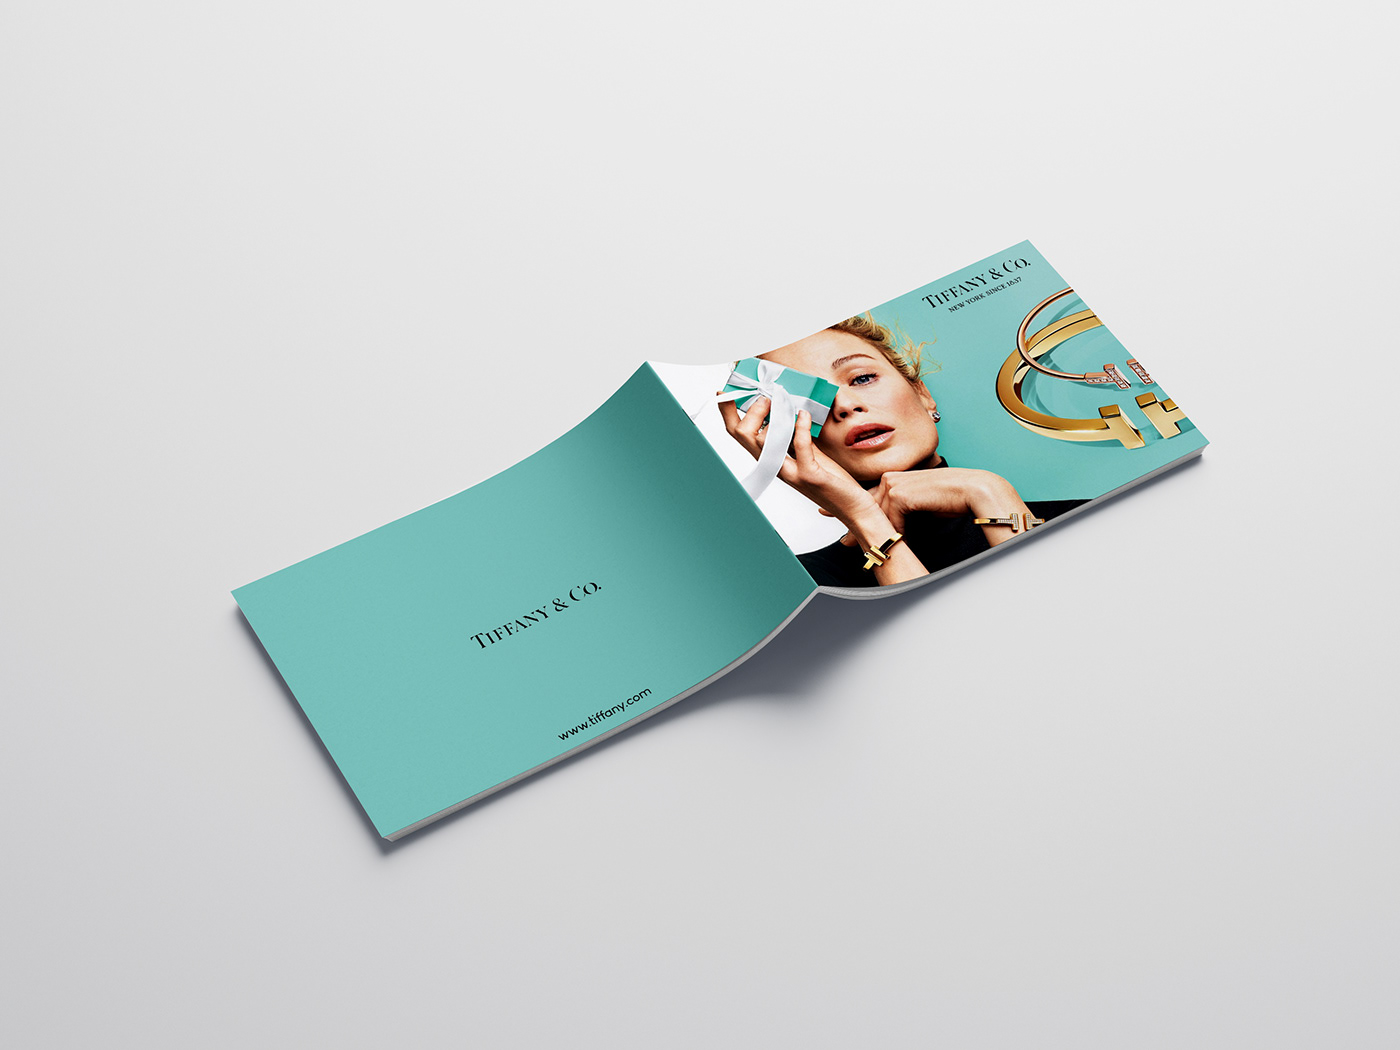 Catalogue Catalogue design tiffany & co Jewellery catalog earrings Necklace silver gold Invoice Design